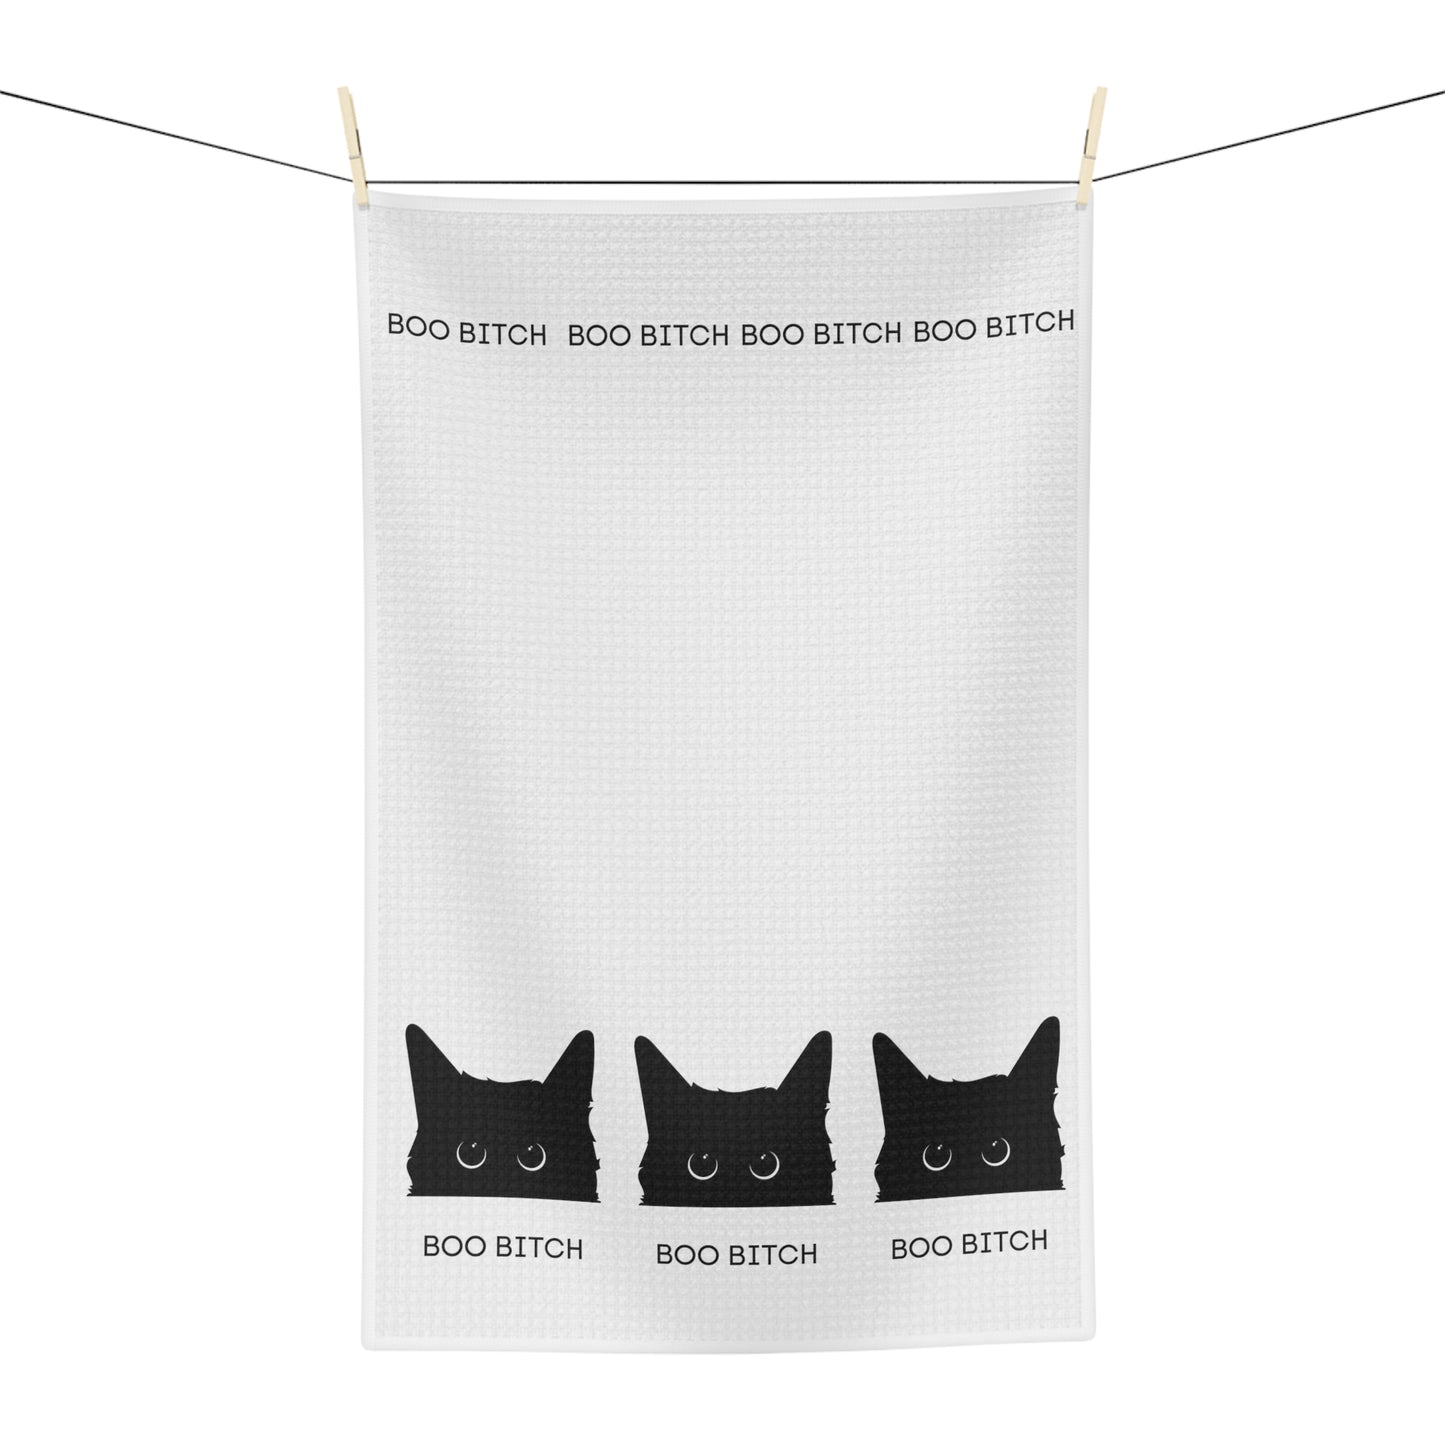 Black Cat Tea Towel, Funny Halloween Dish Towel, Cat Lover Gift, Gift for best friend, Hostess Gift - Design Club Home